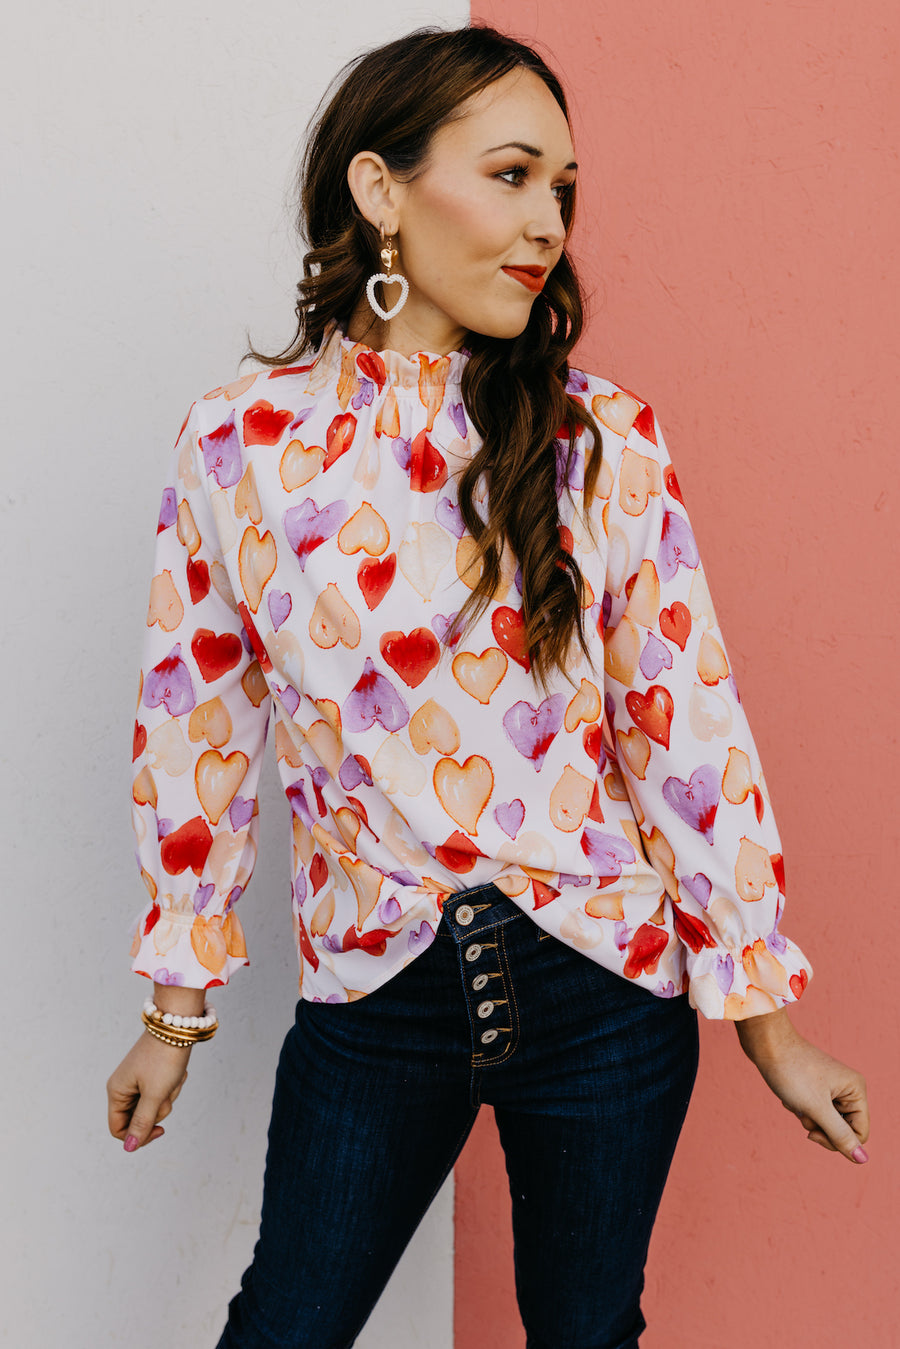 The Feasby Heart Print Blouse